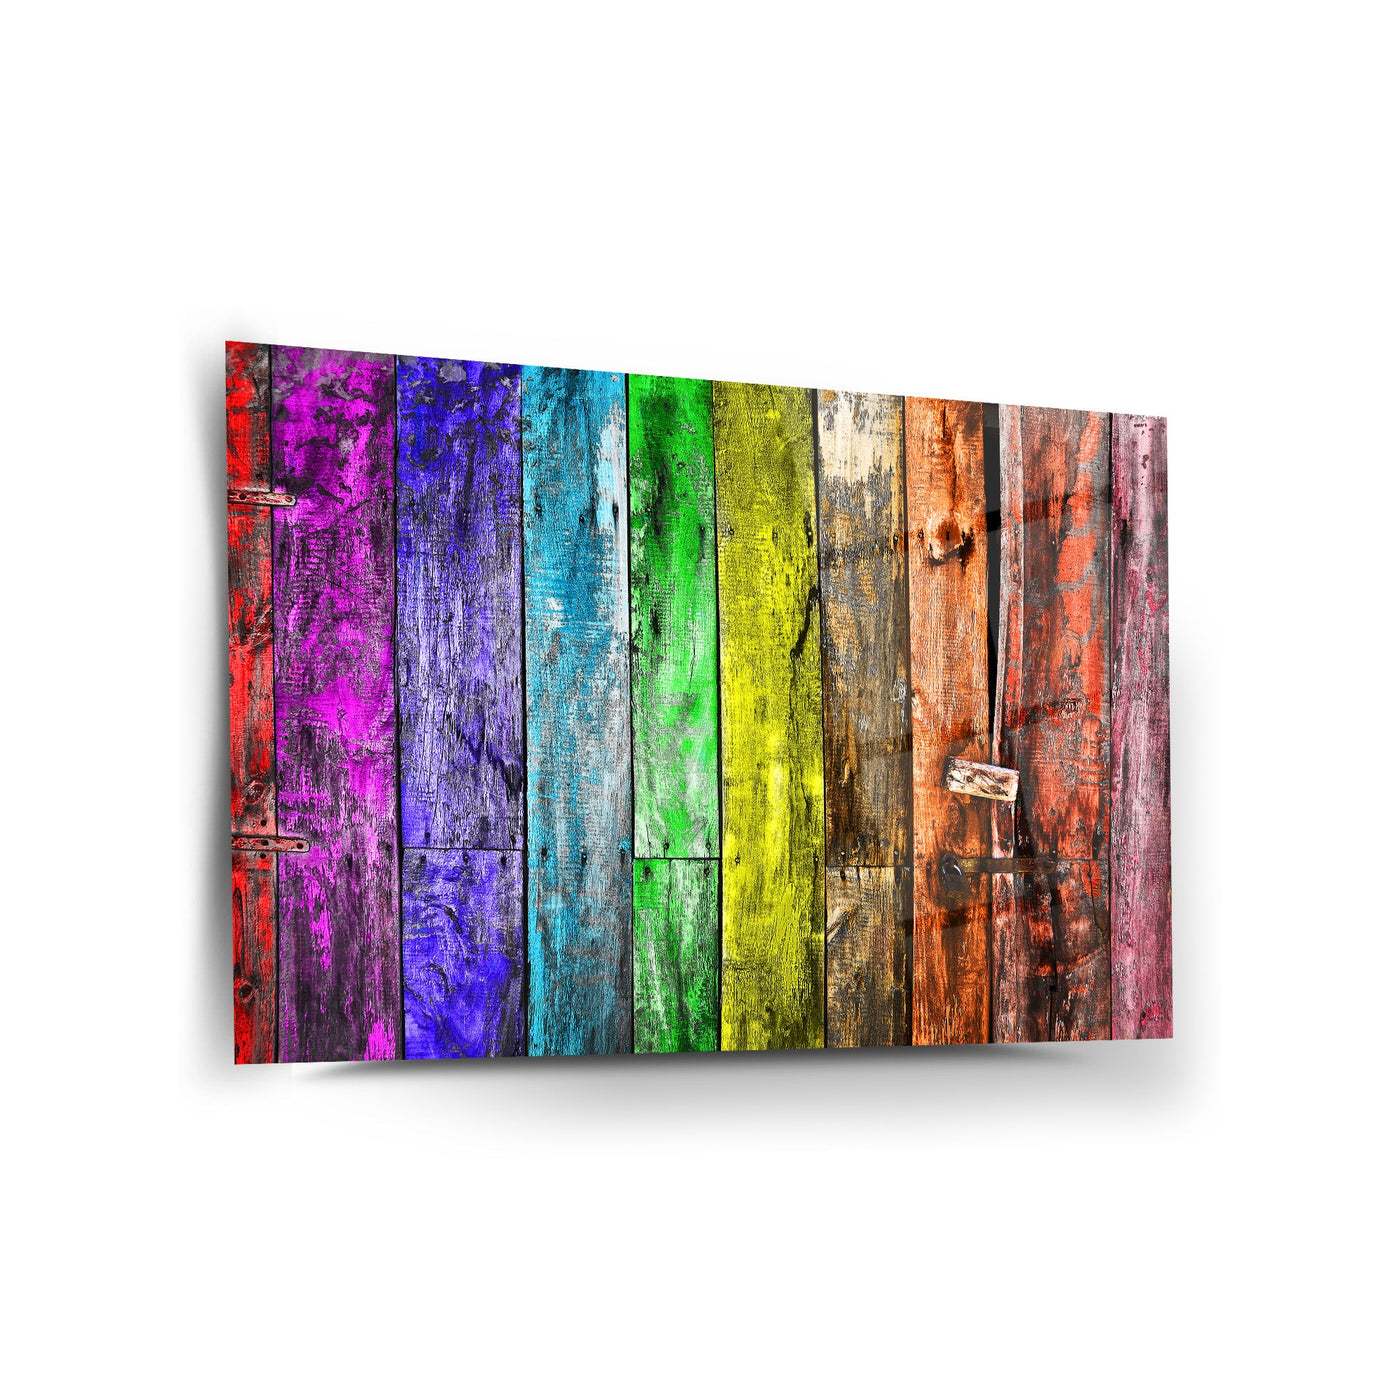 Painted Wood Wall Decor